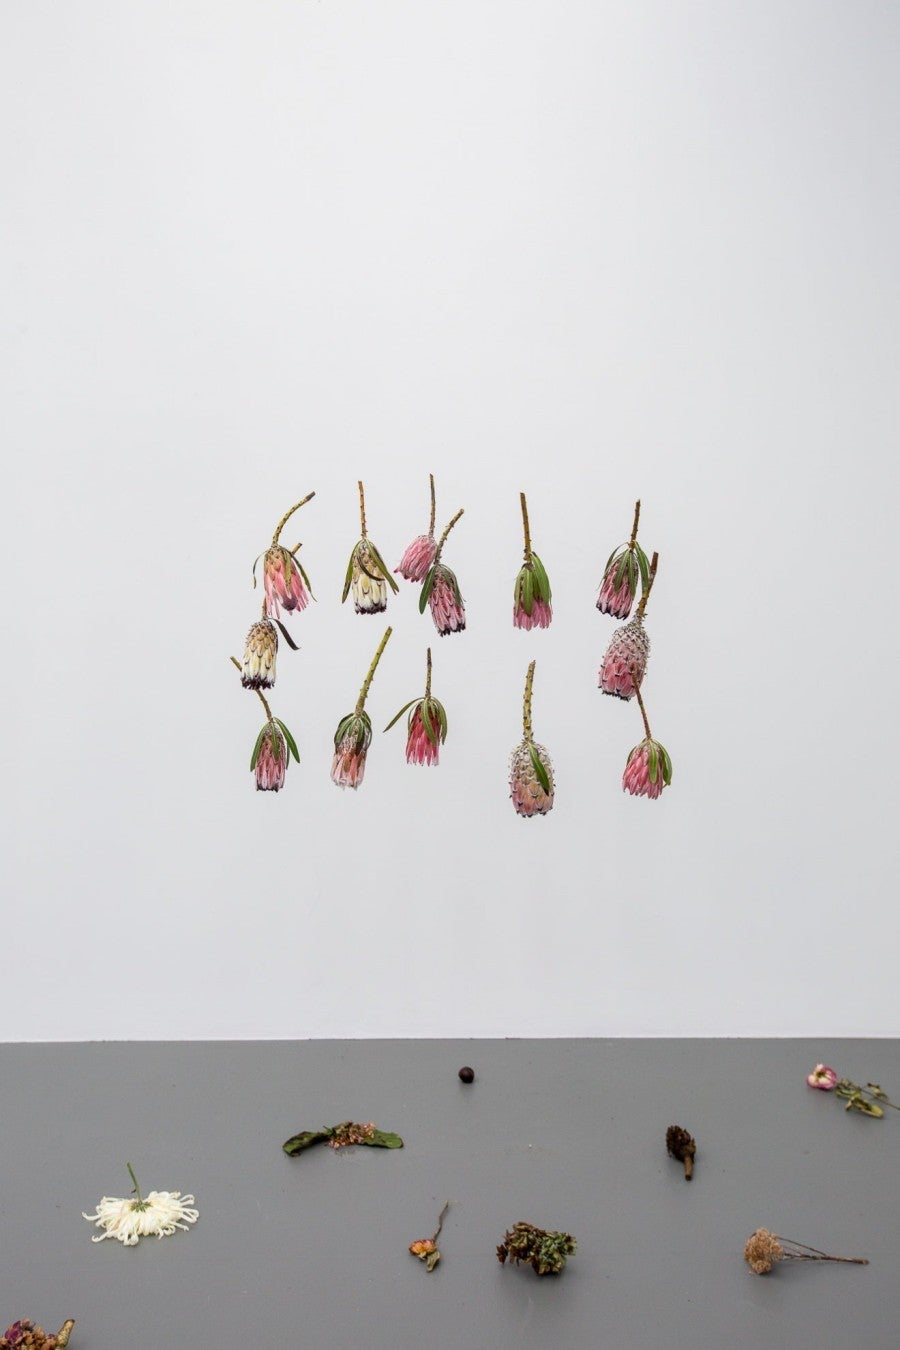 Chloé Quenum, Le Sceau de Salomon, 2018. Installation composed of 5 videos (3 with sound and 2 silent) and of fresh flowers and fruit. Variable dimensions. Exhibition view, The Engine Room, Wellington, New Zealand.